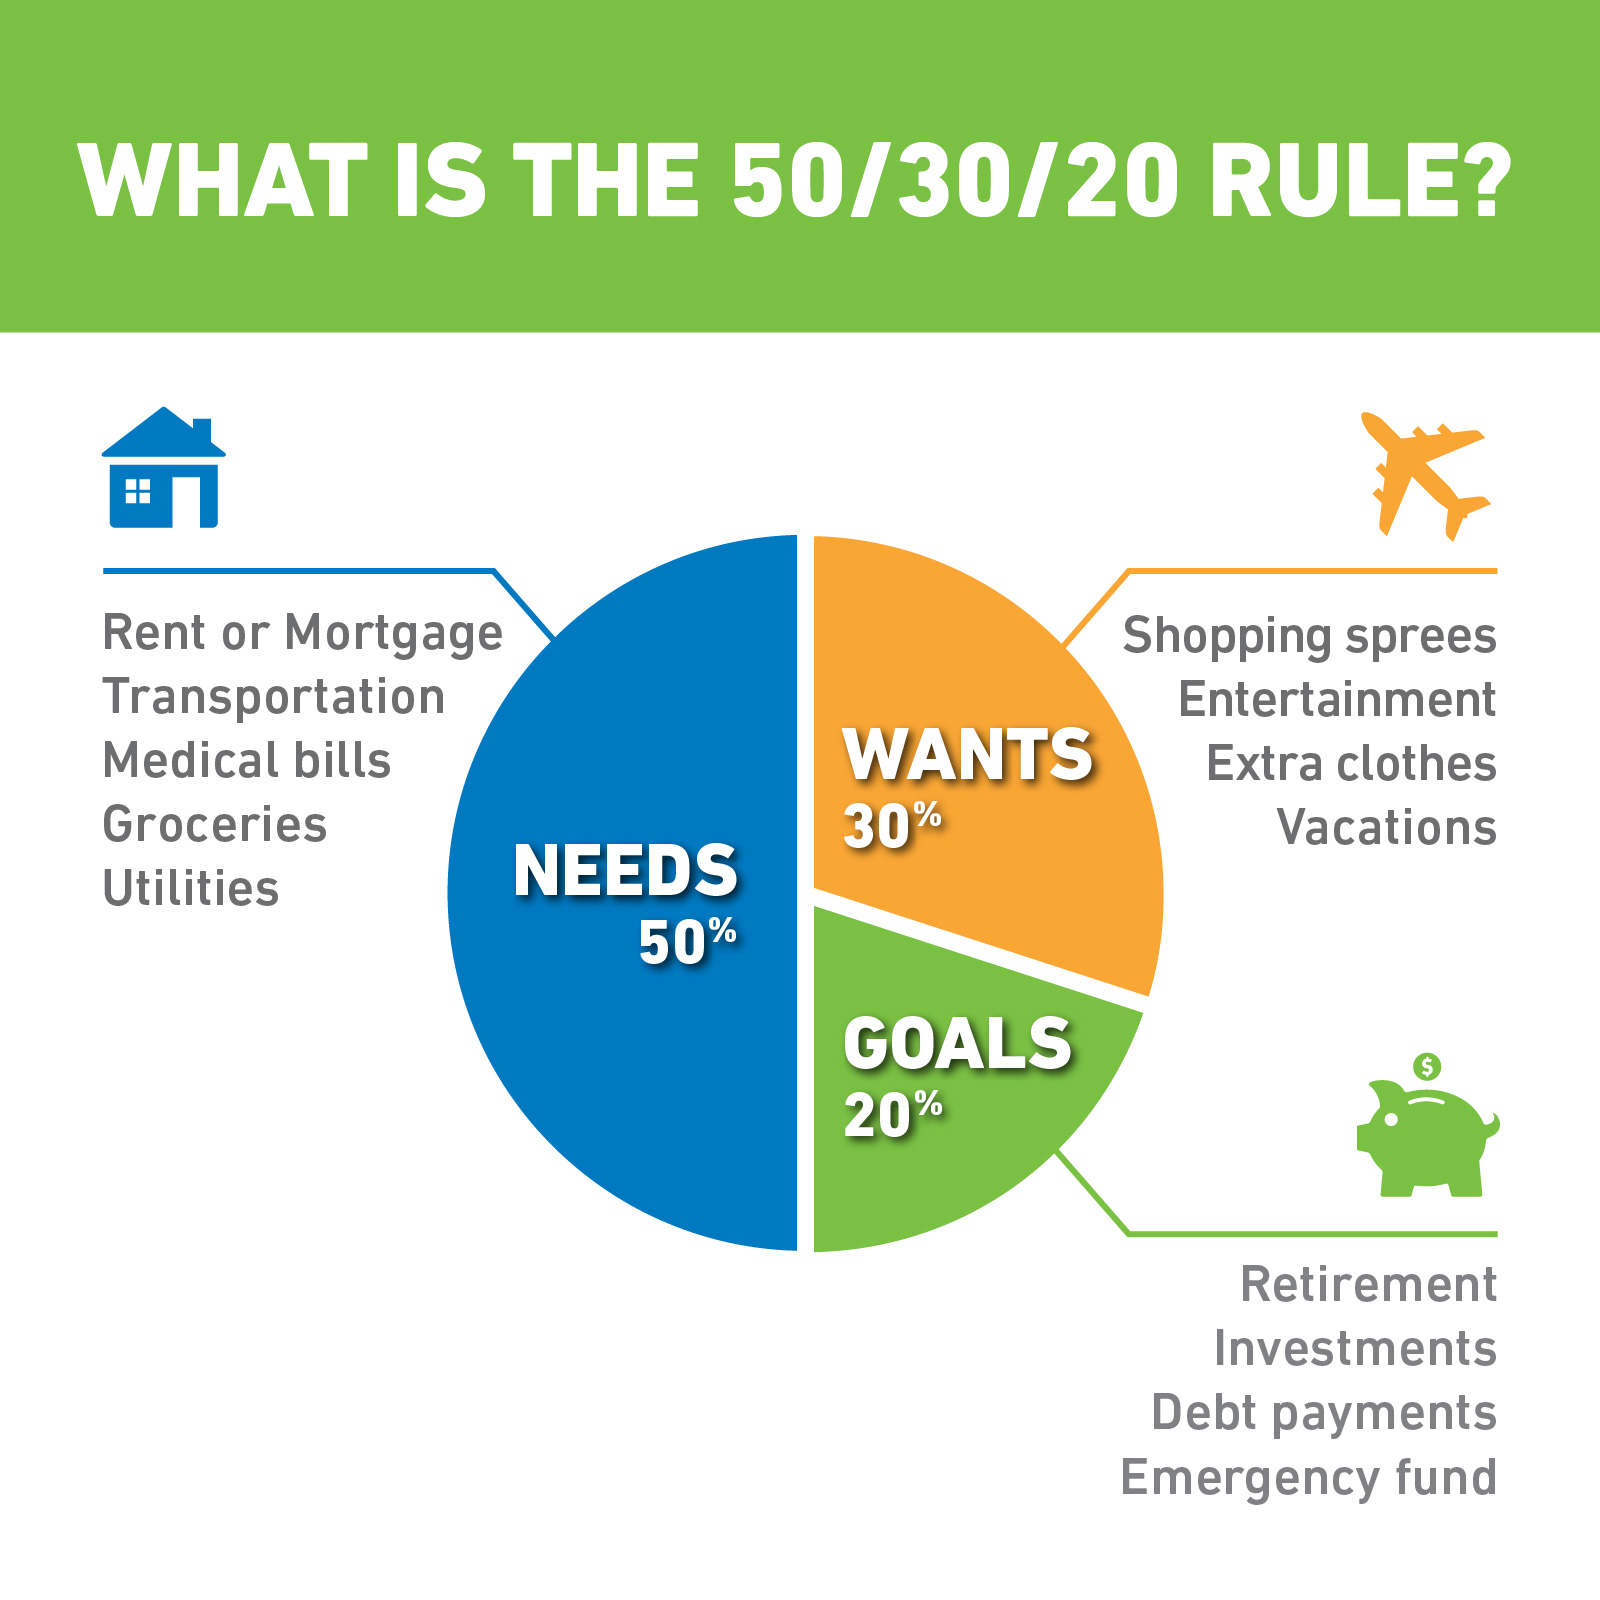 What is the 50/30/20 rule?